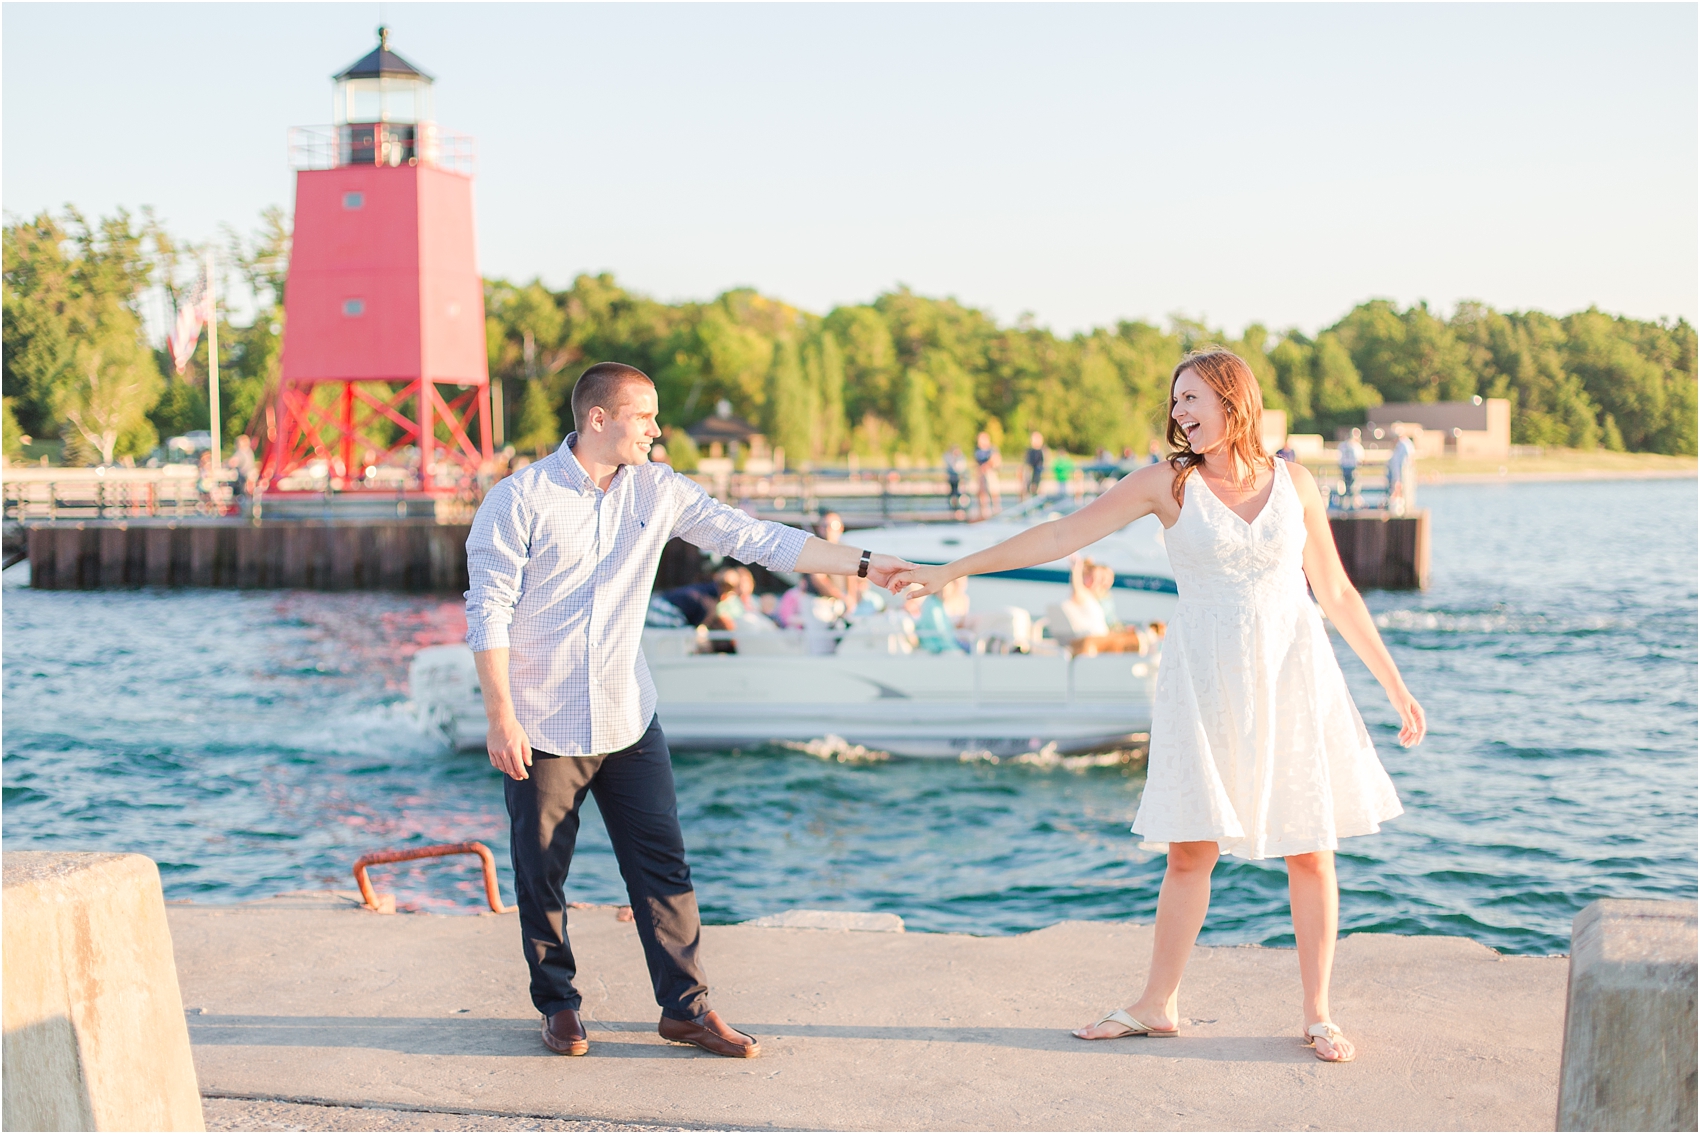 romantic-sunset-engagement-photos-at-the-lighthouse-in-charlevoix-mi-by-courtney-carolyn-photography_0013.jpg